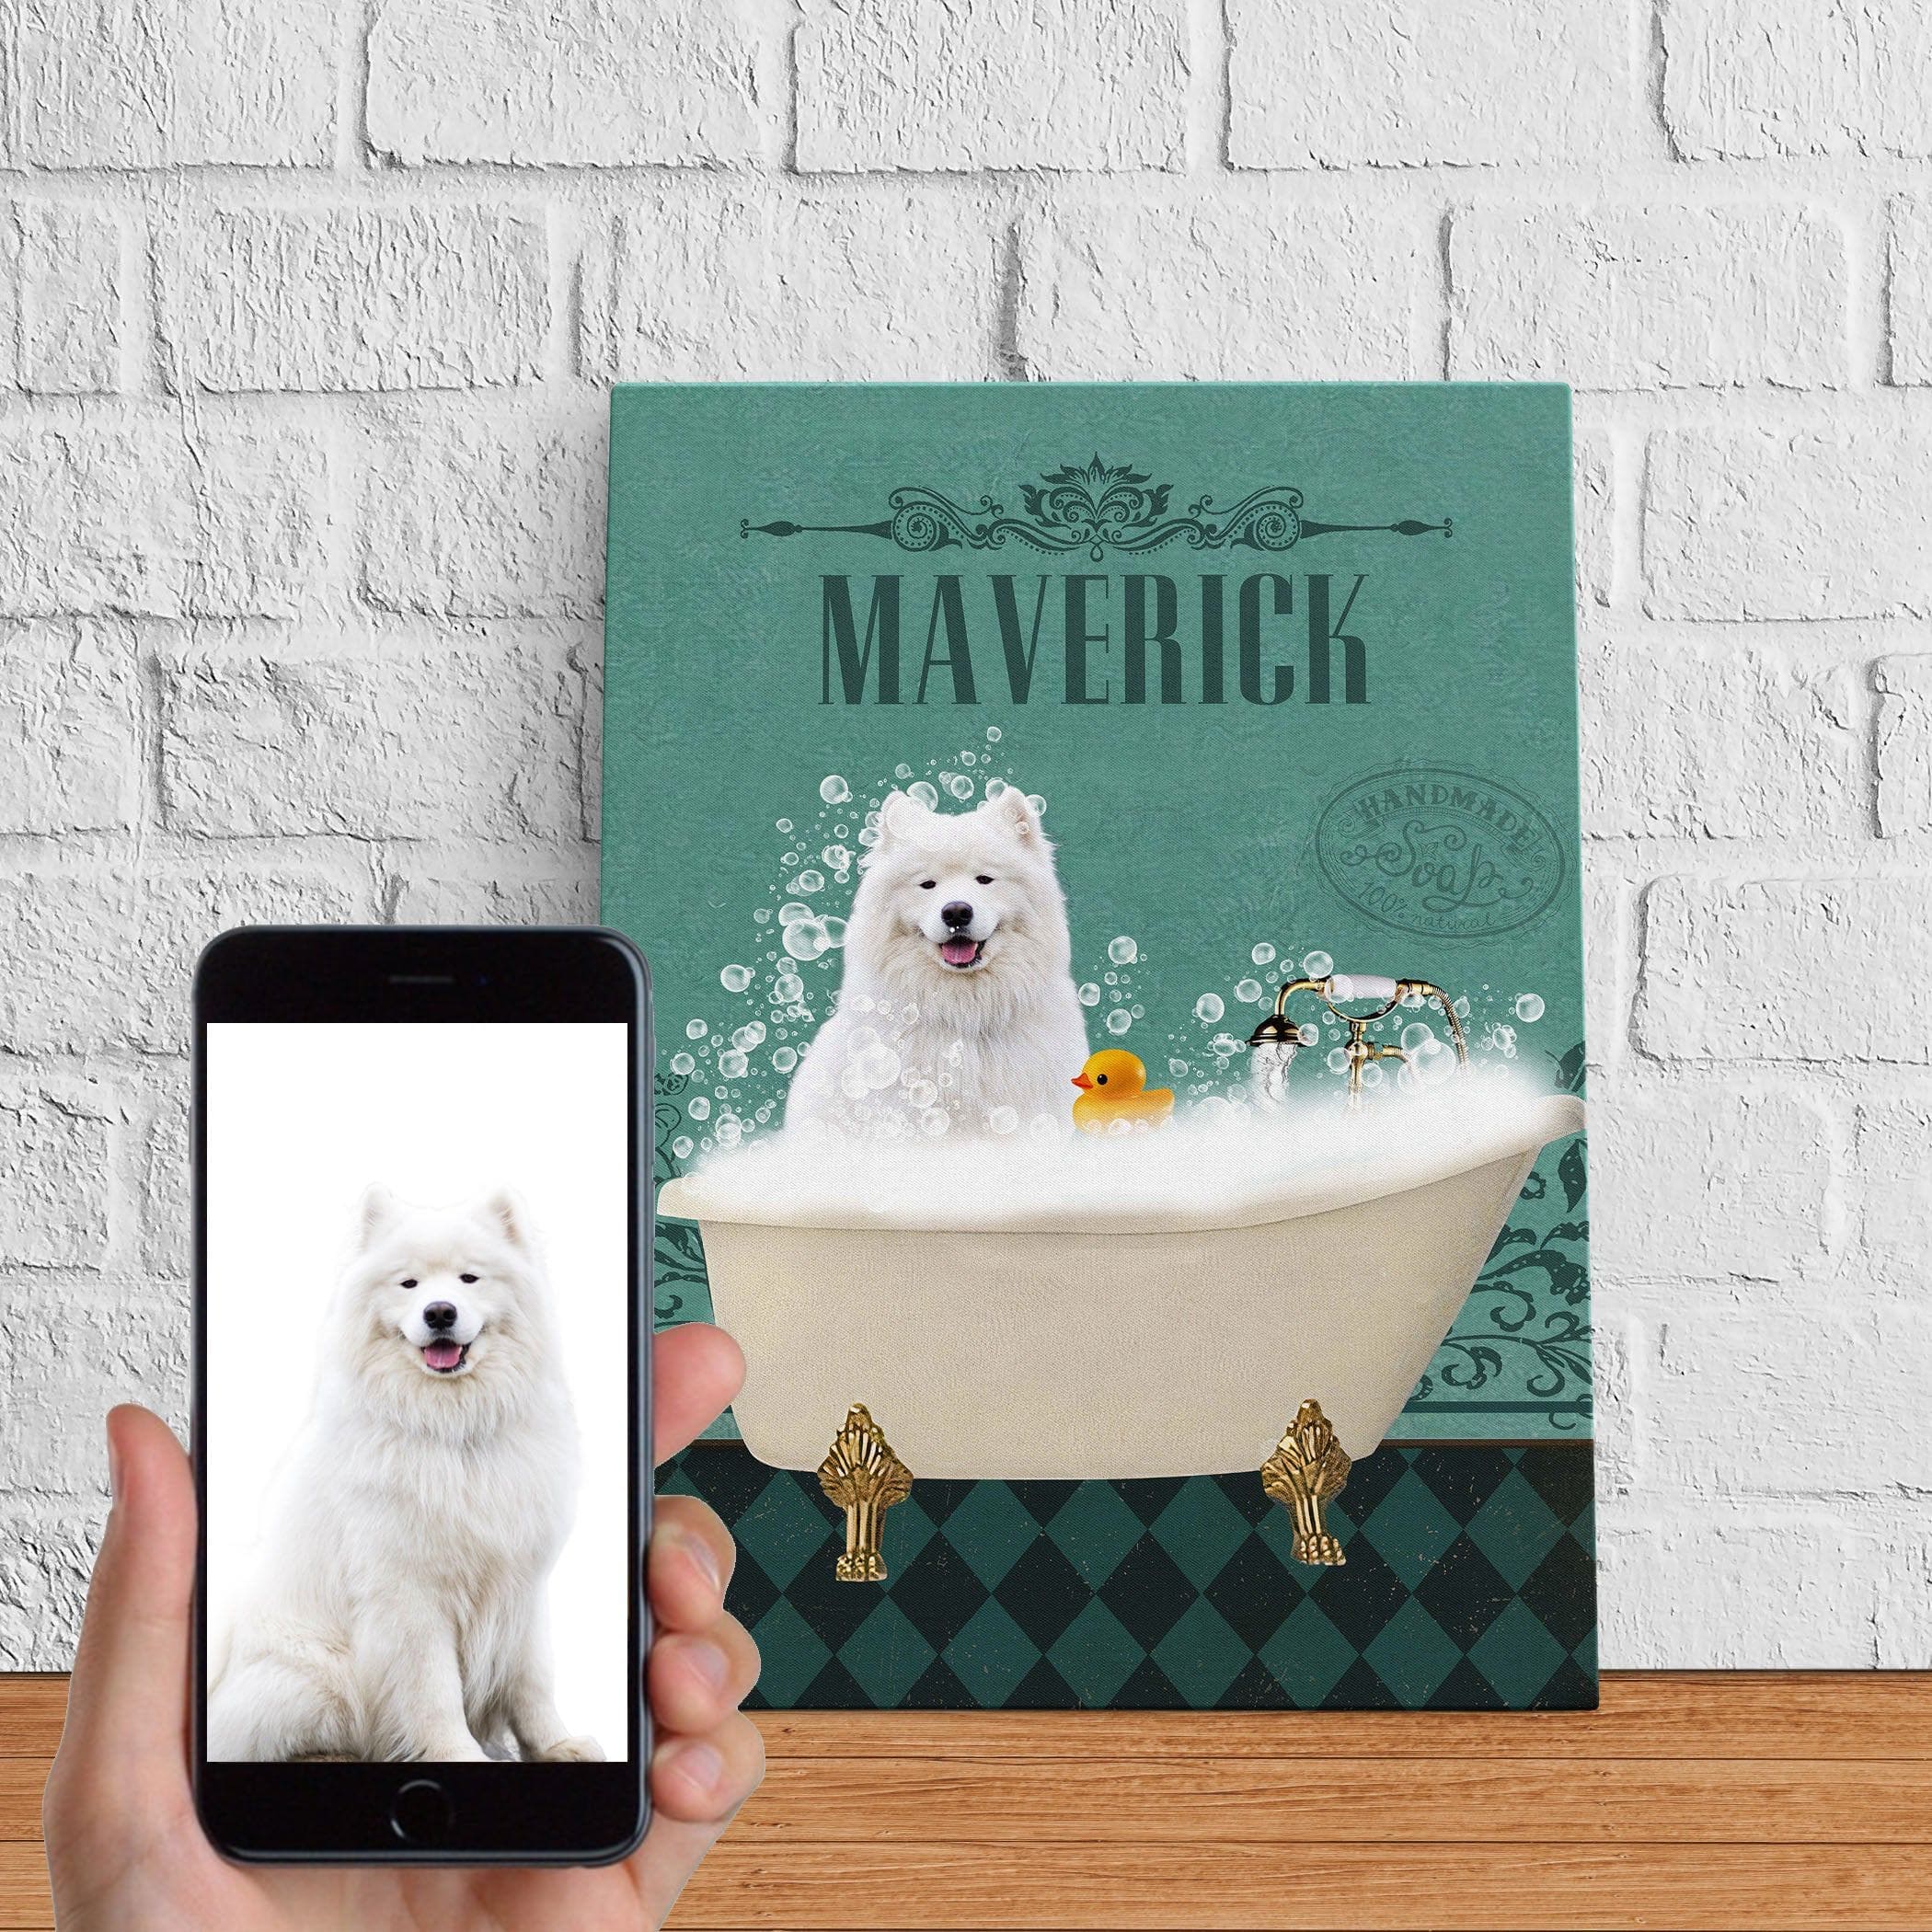 USA MADE Dog In Bathtub Personalized Pet Poster Canvas Print | Personalized Dog Cat Prints | Magazine Covers | Custom Pet Portrait from Photo | Personalized Gifts for Dog Mom or Dad, Pet Memorial Gift